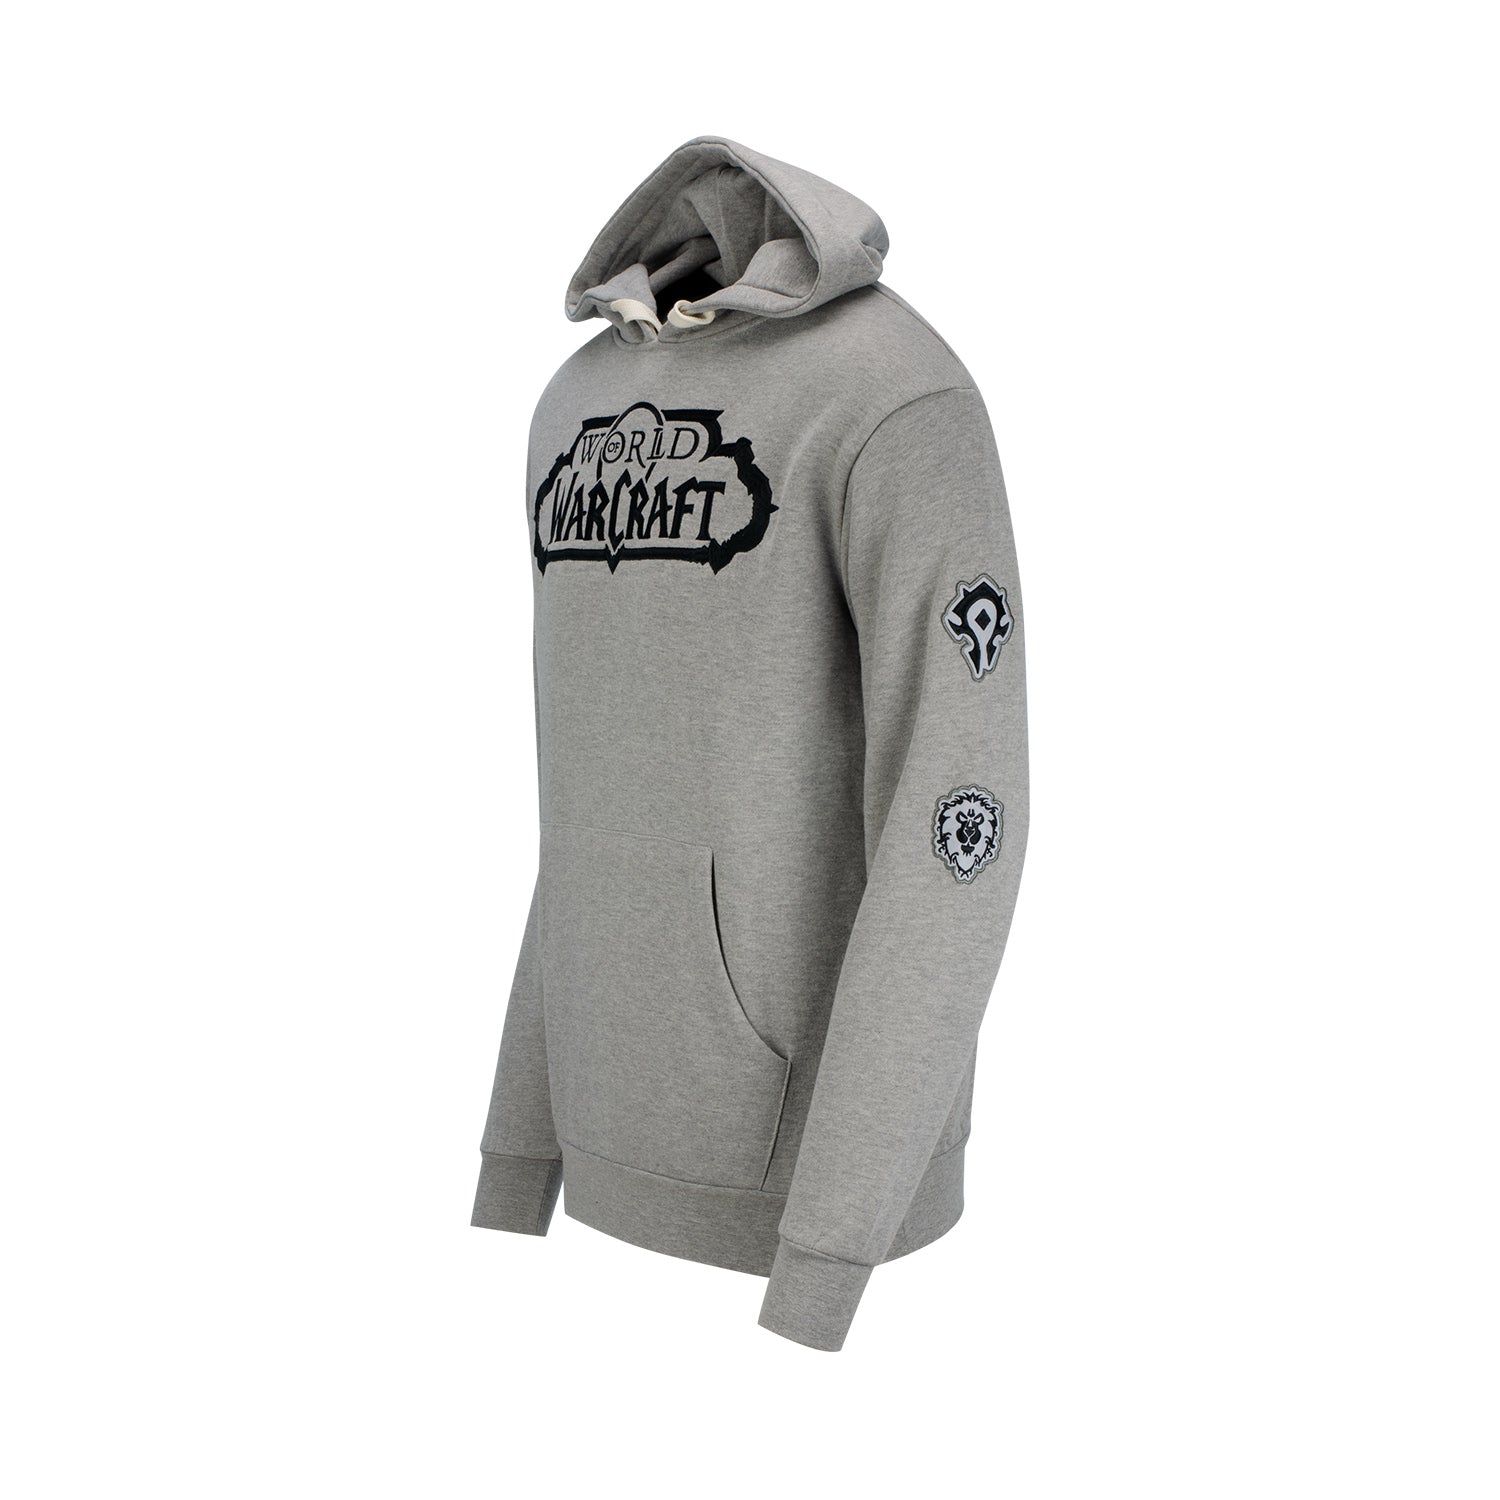 World of Warcraft Heavy Weight Patch Pullover Grey Hoodie - Left Side View